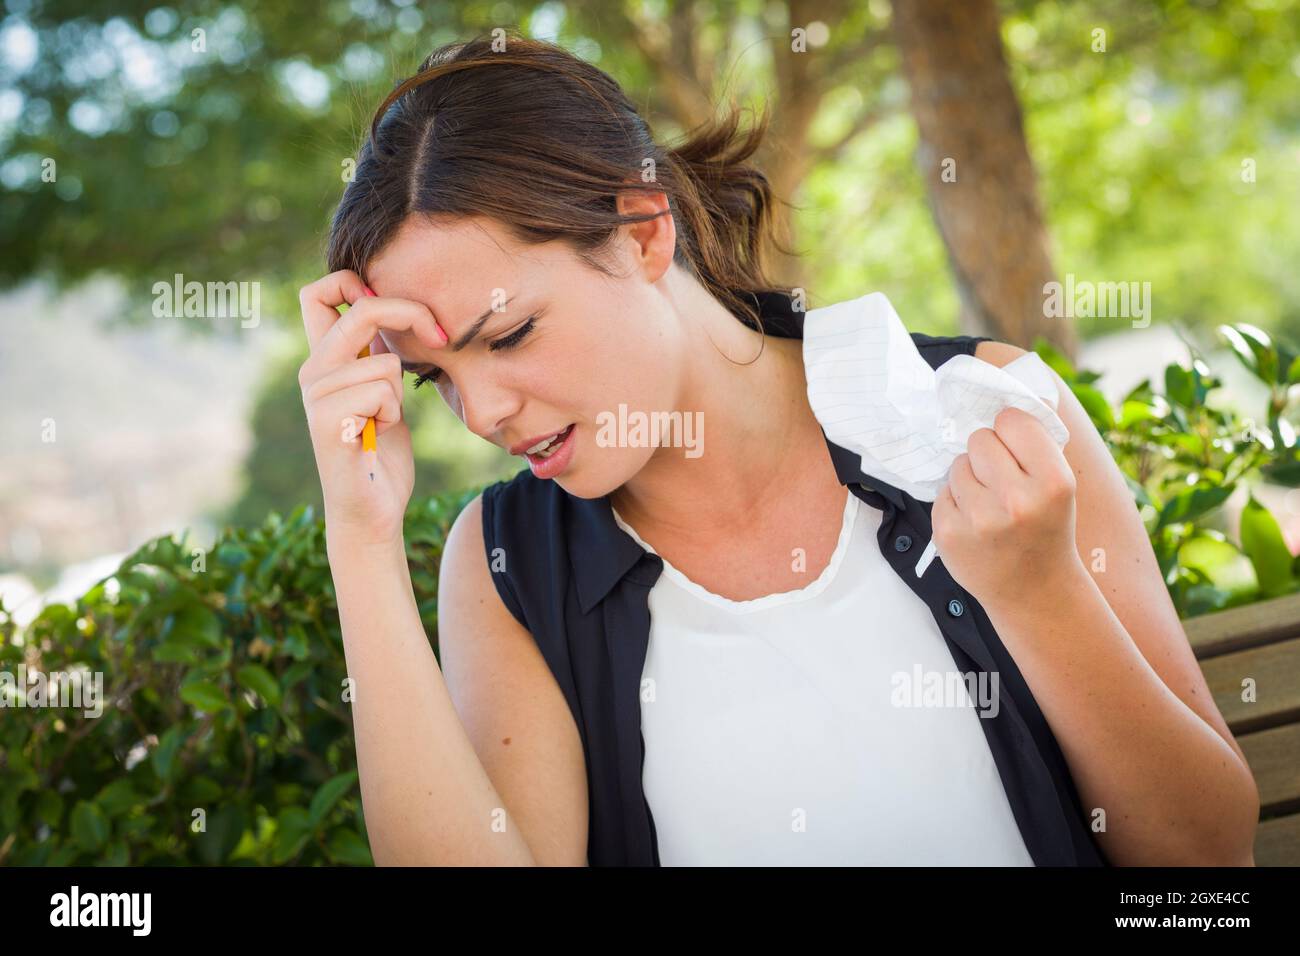 Frustrated and Upset Young Woman with Pencil and Crumpled Paper in Her Hand Sitting on Bench Outside. Stock Photo